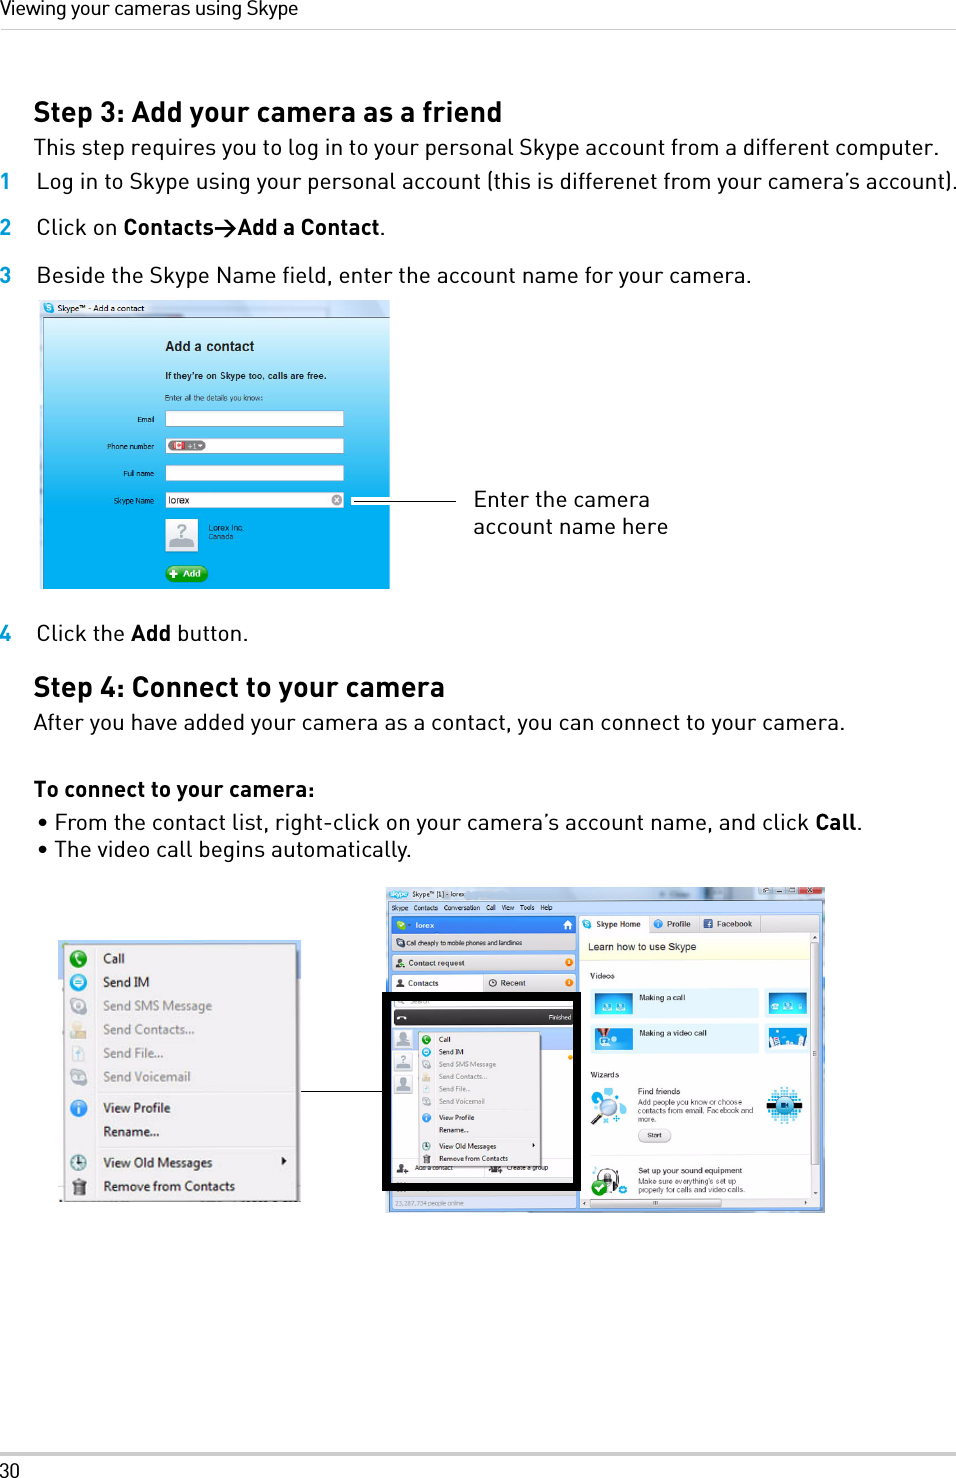 30Viewing your cameras using SkypeStep 3: Add your camera as a friendThis step requires you to log in to your personal Skype account from a different computer.1Log in to Skype using your personal account (this is differenet from your camera’s account).2Click on Contacts&gt;Add a Contact.3Beside the Skype Name field, enter the account name for your camera.4Click the Add button.Step 4: Connect to your cameraAfter you have added your camera as a contact, you can connect to your camera.To connect to your camera:• From the contact list, right-click on your camera’s account name, and click Call.• The video call begins automatically.Enter the camera account name here